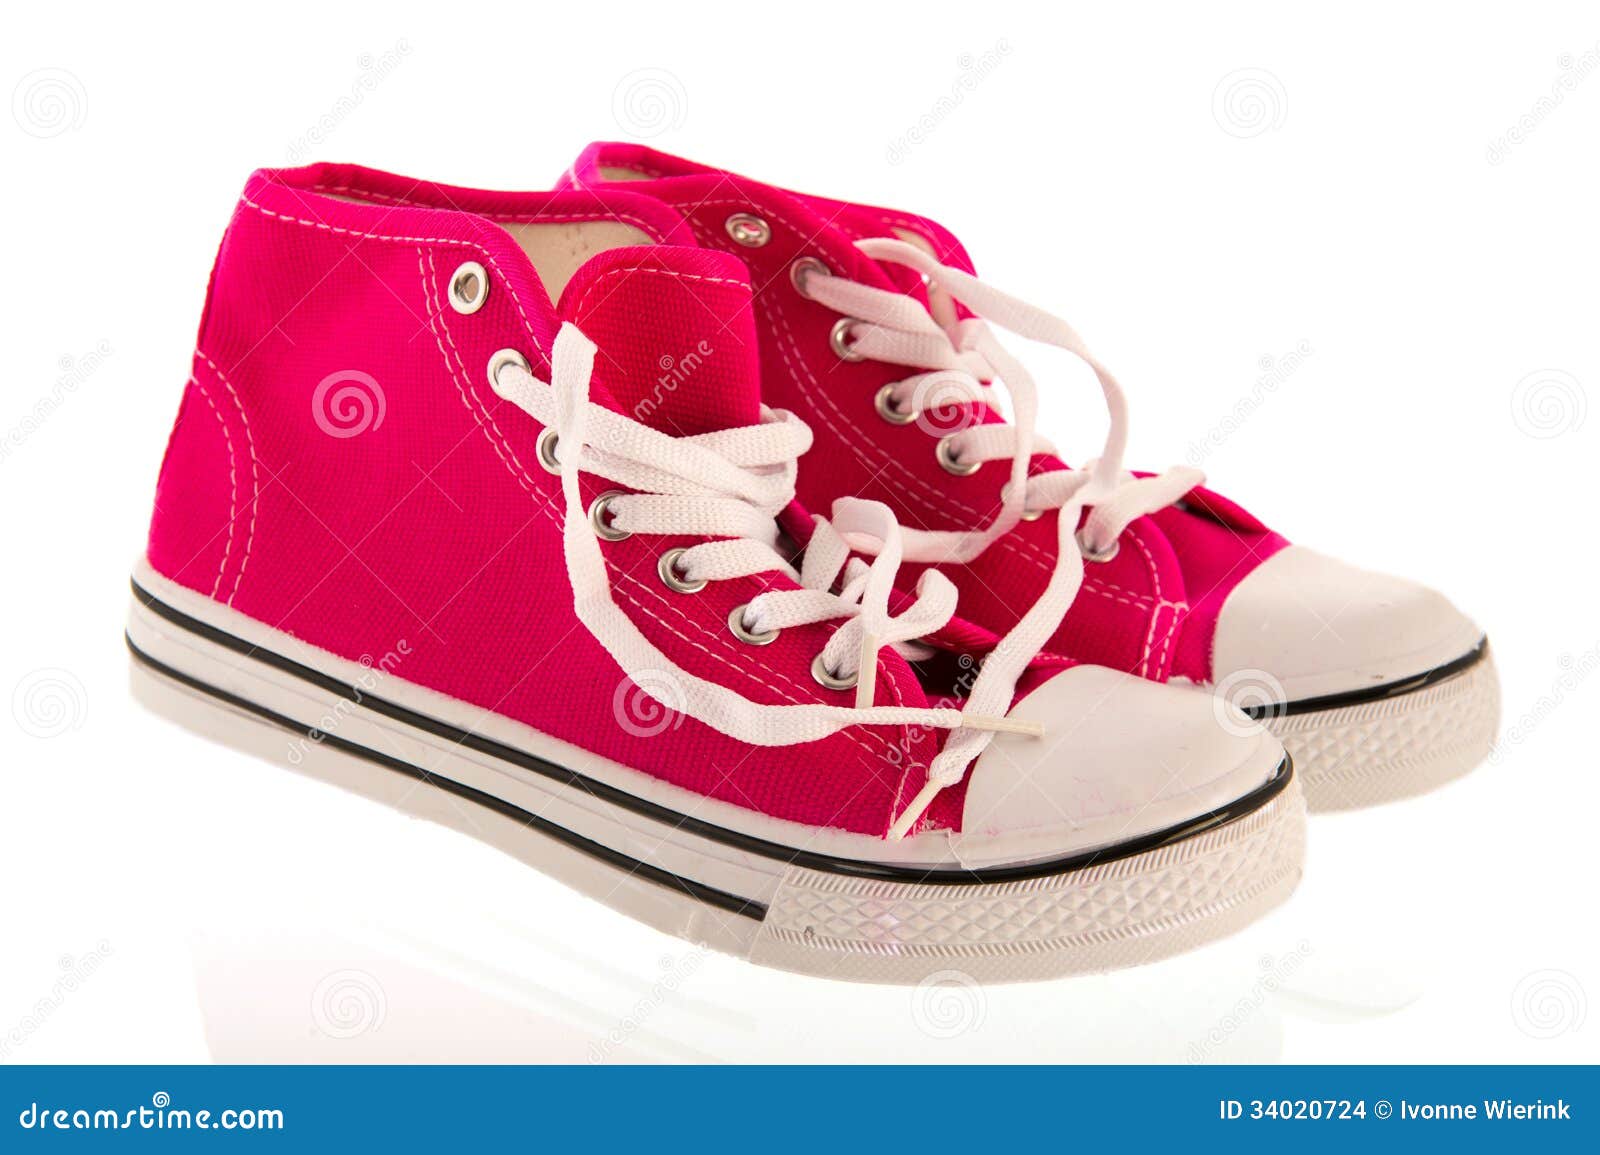 Pink basletball shoes stock photo. Image of white, adult - 34020724